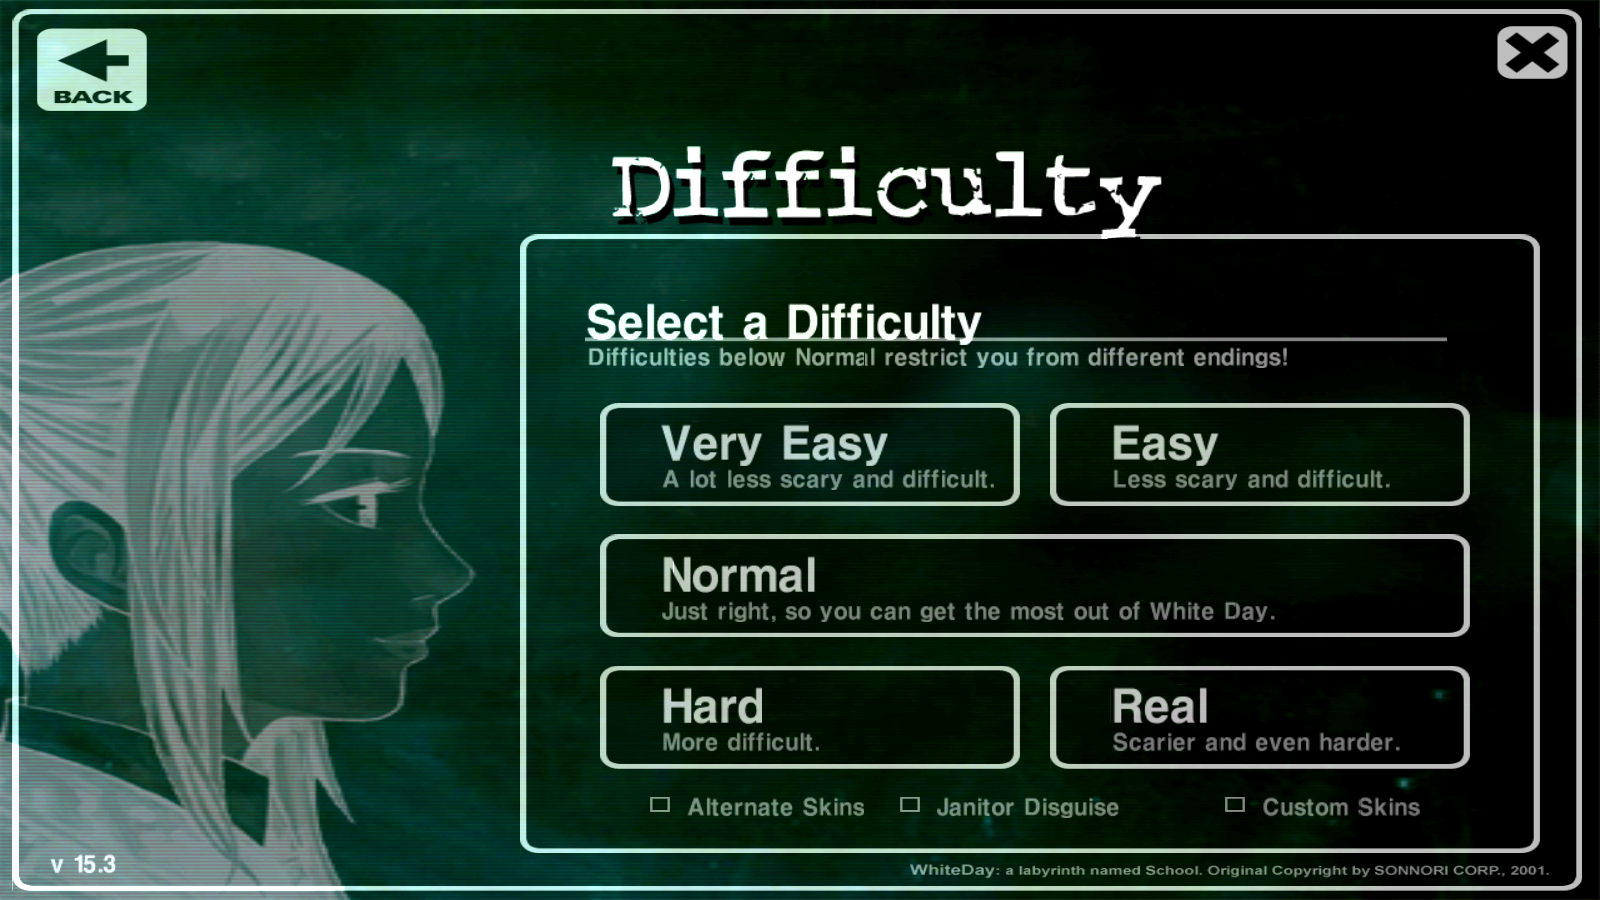 A difficult game мод. Difficulty игра. Хард гейм. Select difficulty. Games difficult.